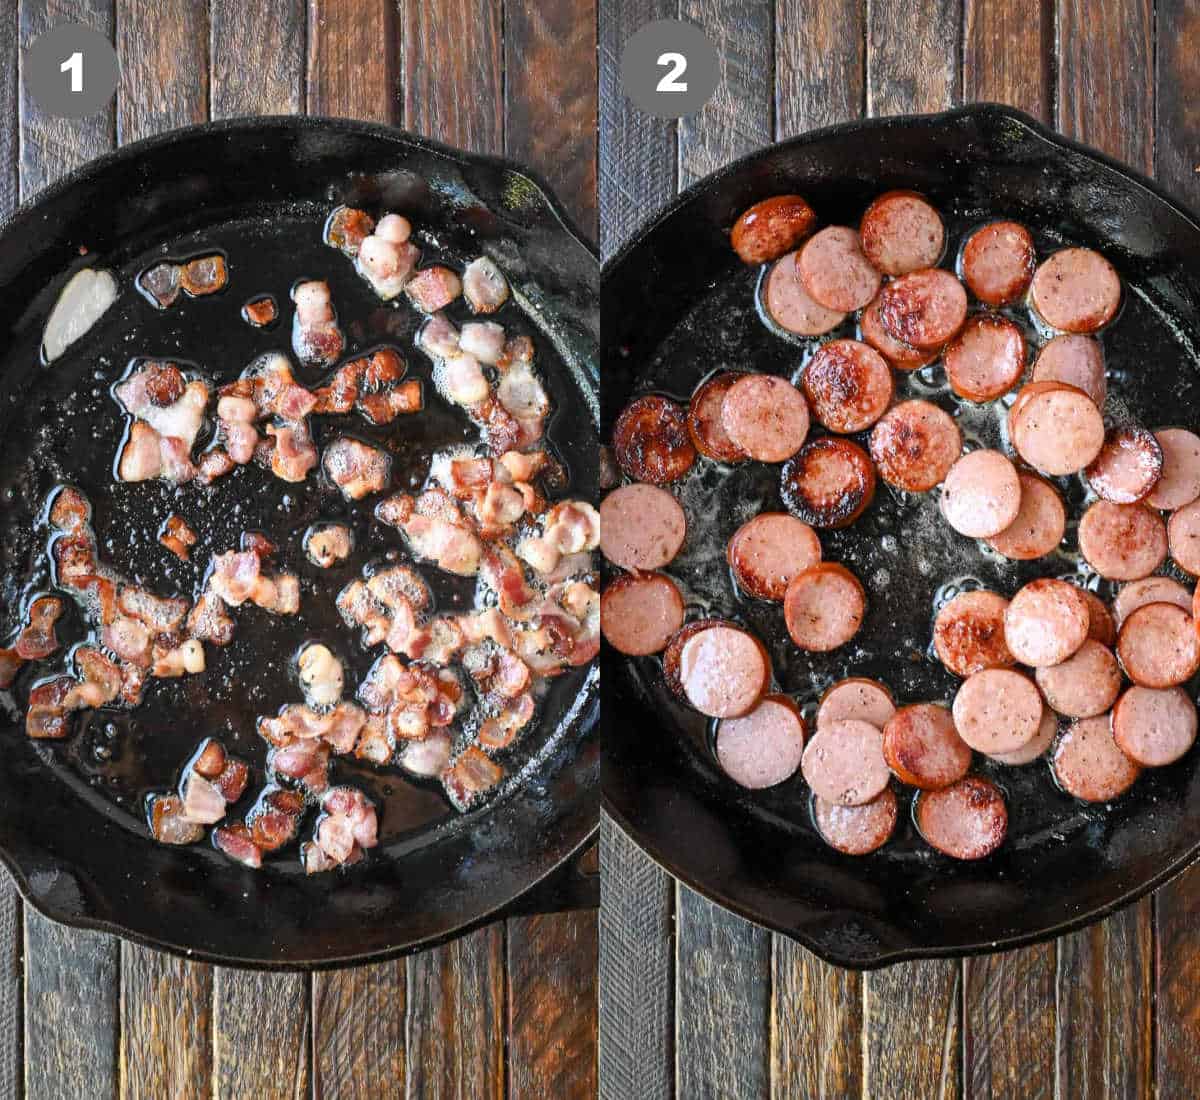 Chopped bacon cooked in a cast iron skillet then removed and sliced sausages added in.